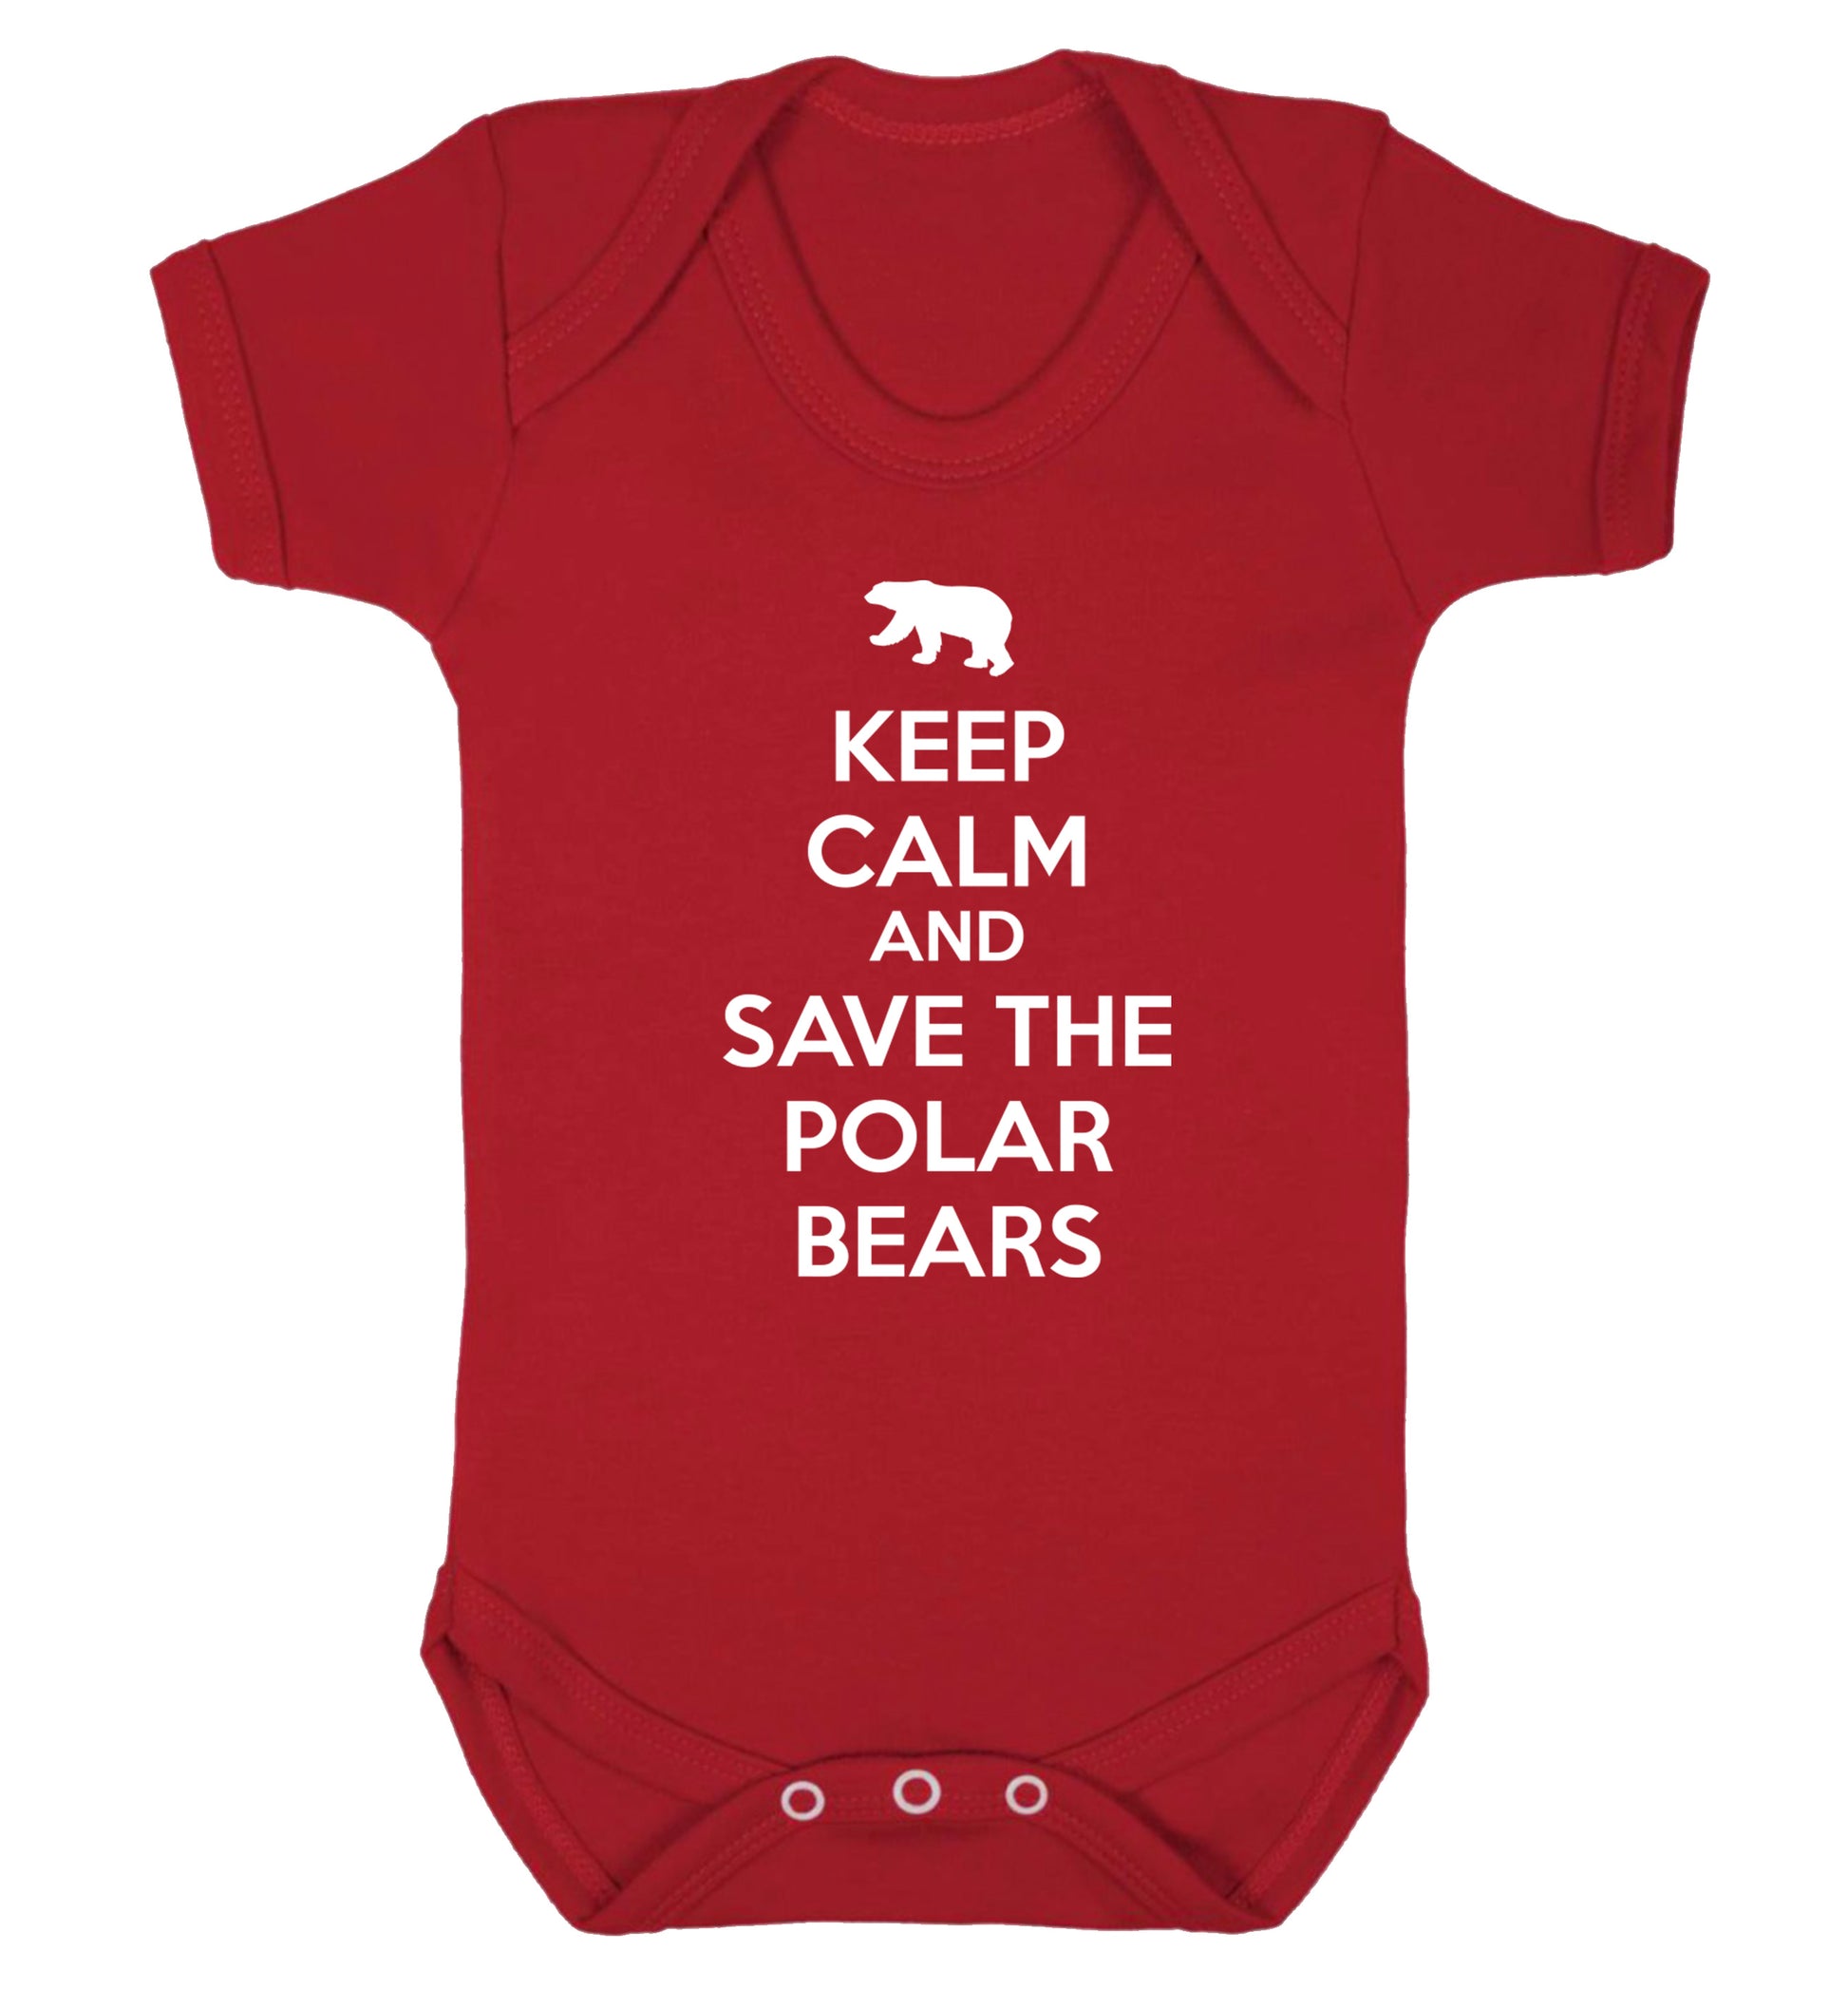 Keep calm and save the polar bears Baby Vest red 18-24 months